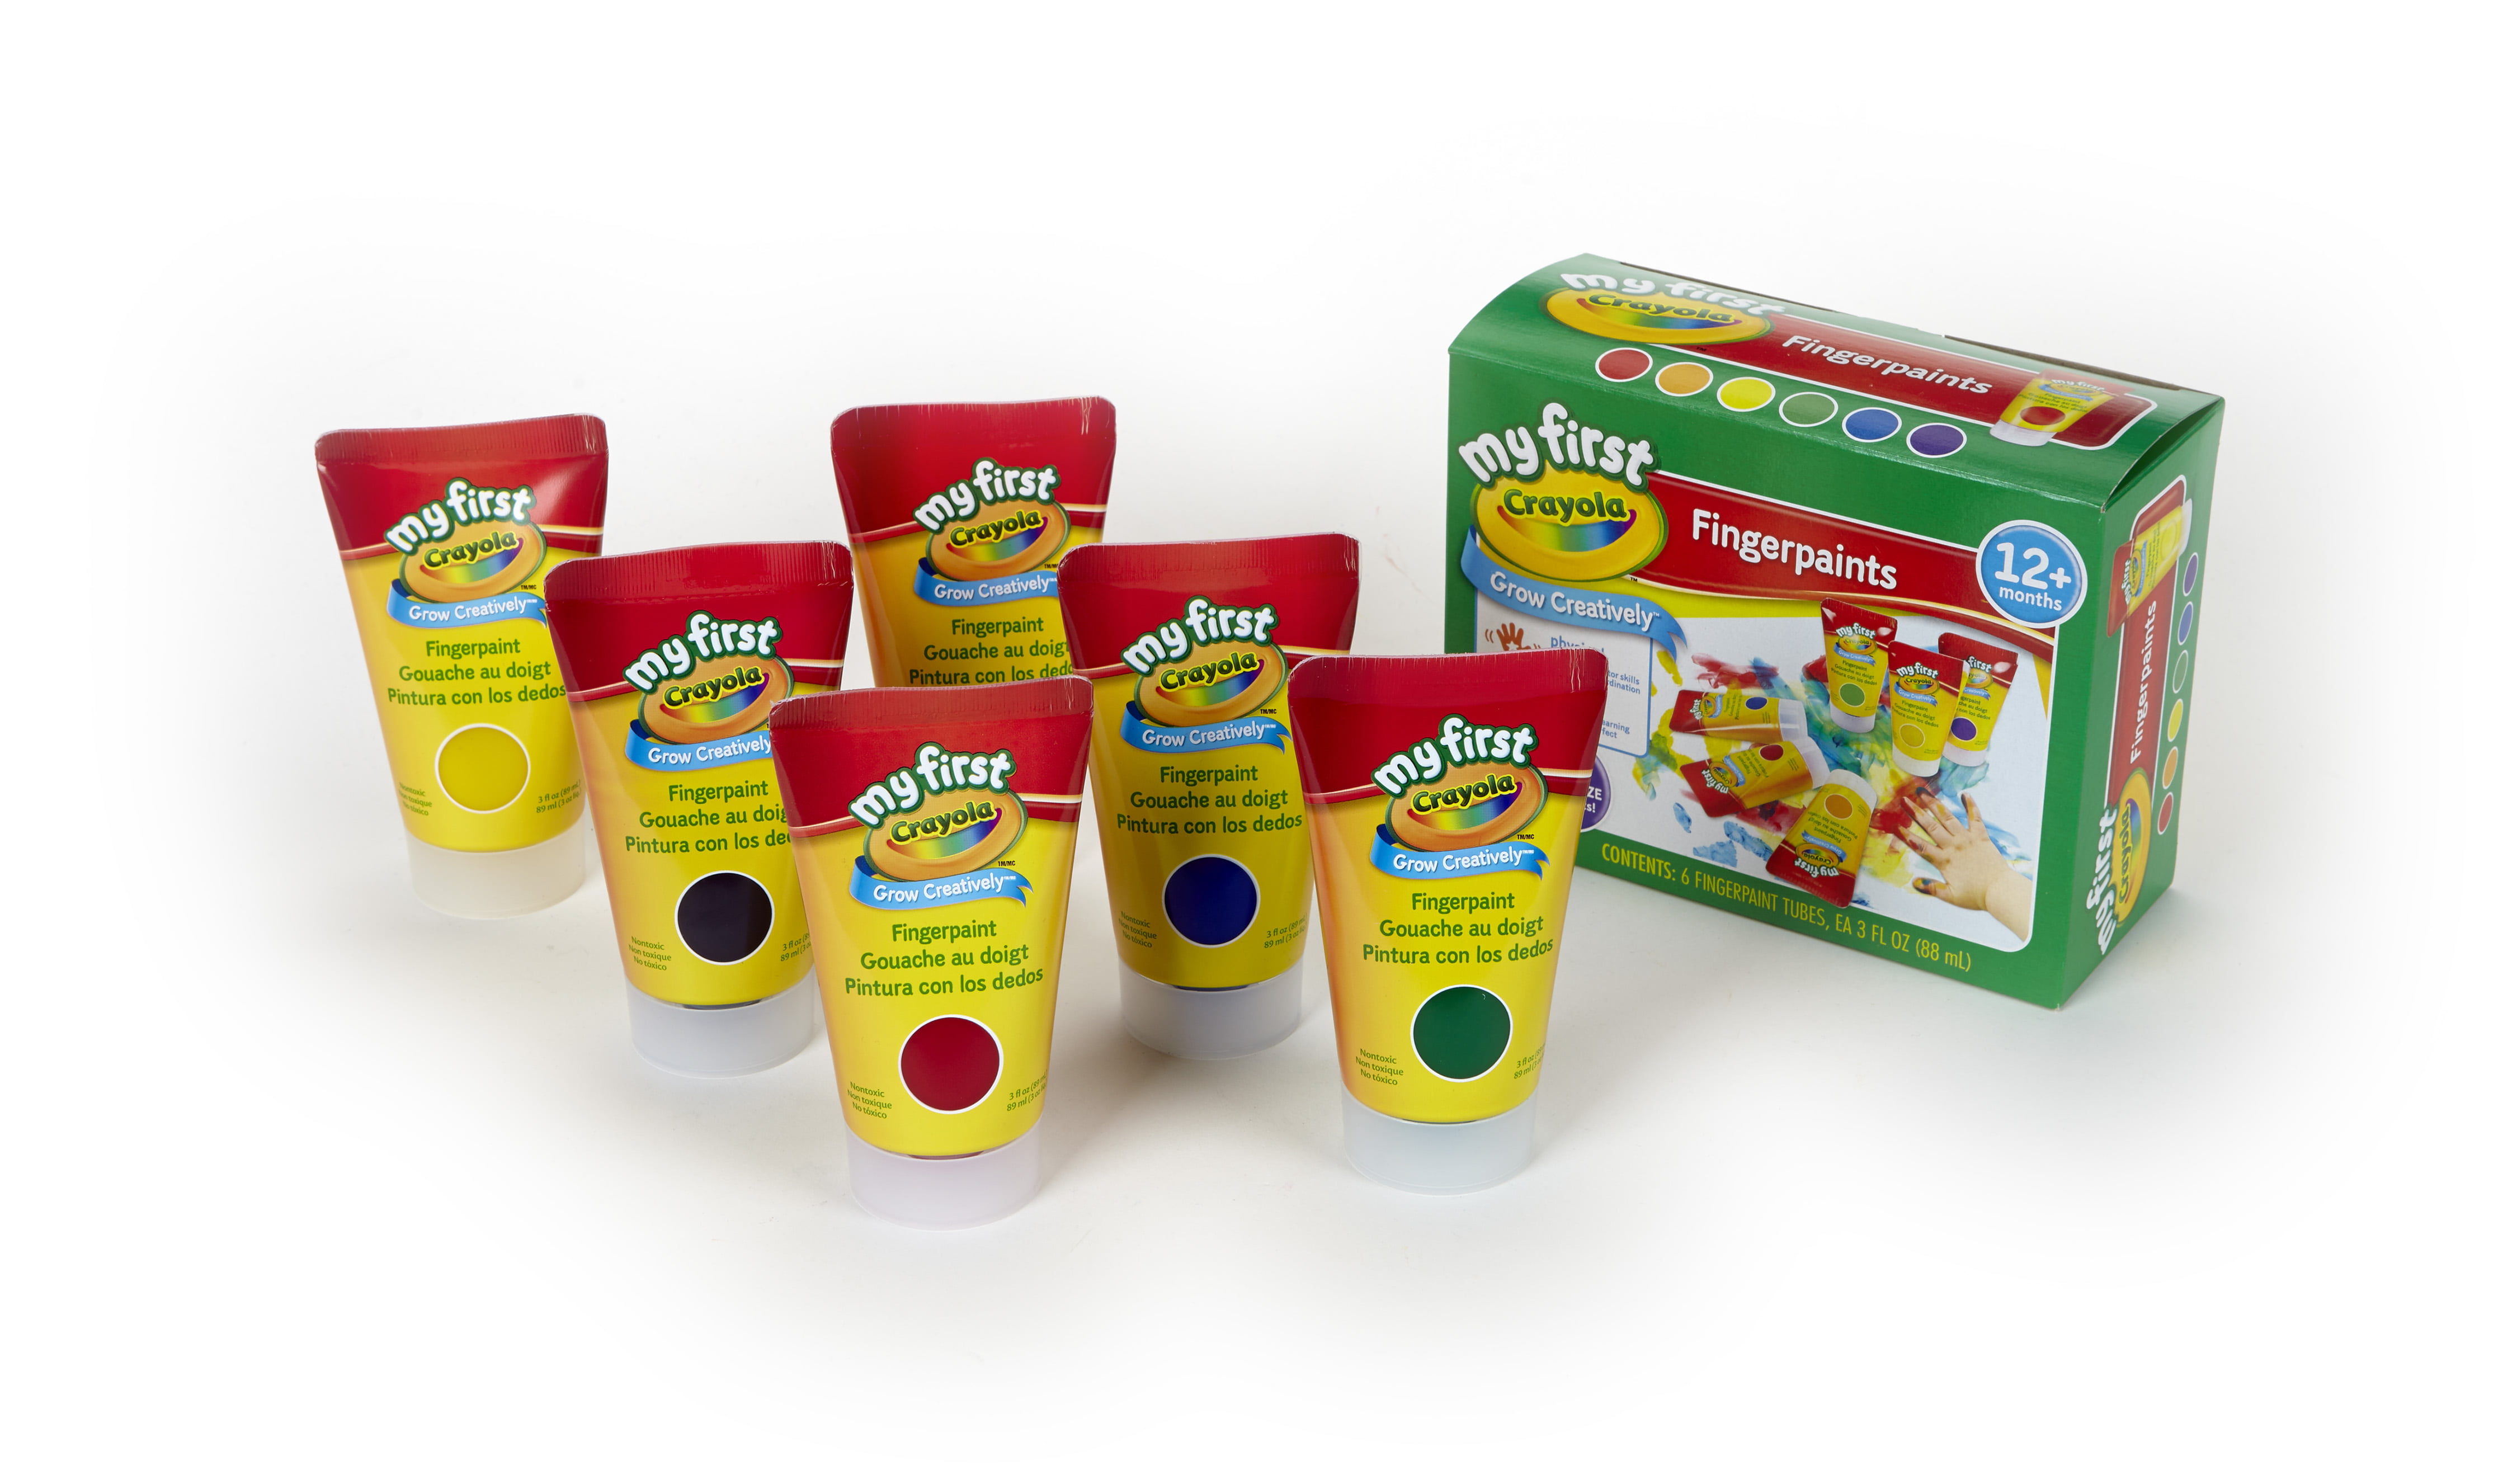  Crayola My First Fingerpaint Kit, Washable Paint, Gifts, Ages  1, 2, 3, 4, 5 : Toys & Games